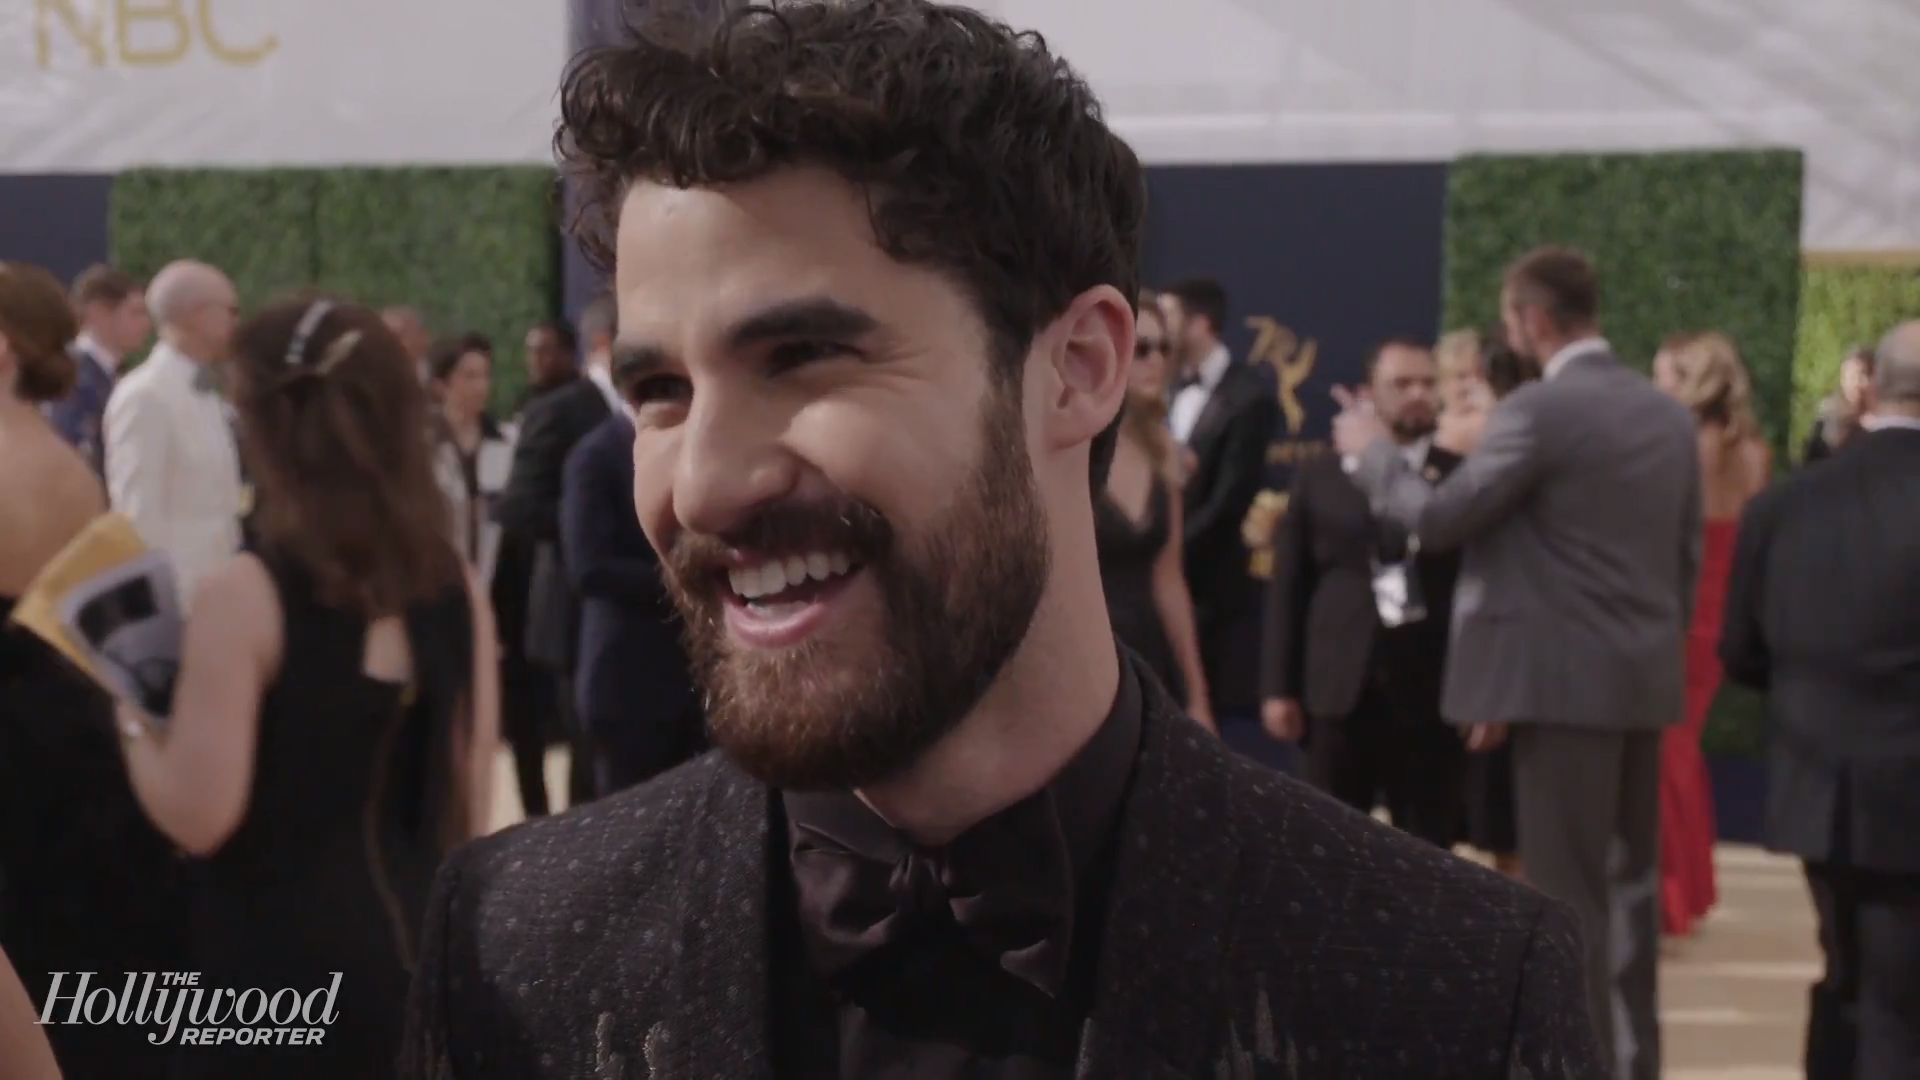 Darren Criss On the "Excruciatingly Exciting" Journey of 'The Assassination of Gianni Versace' 